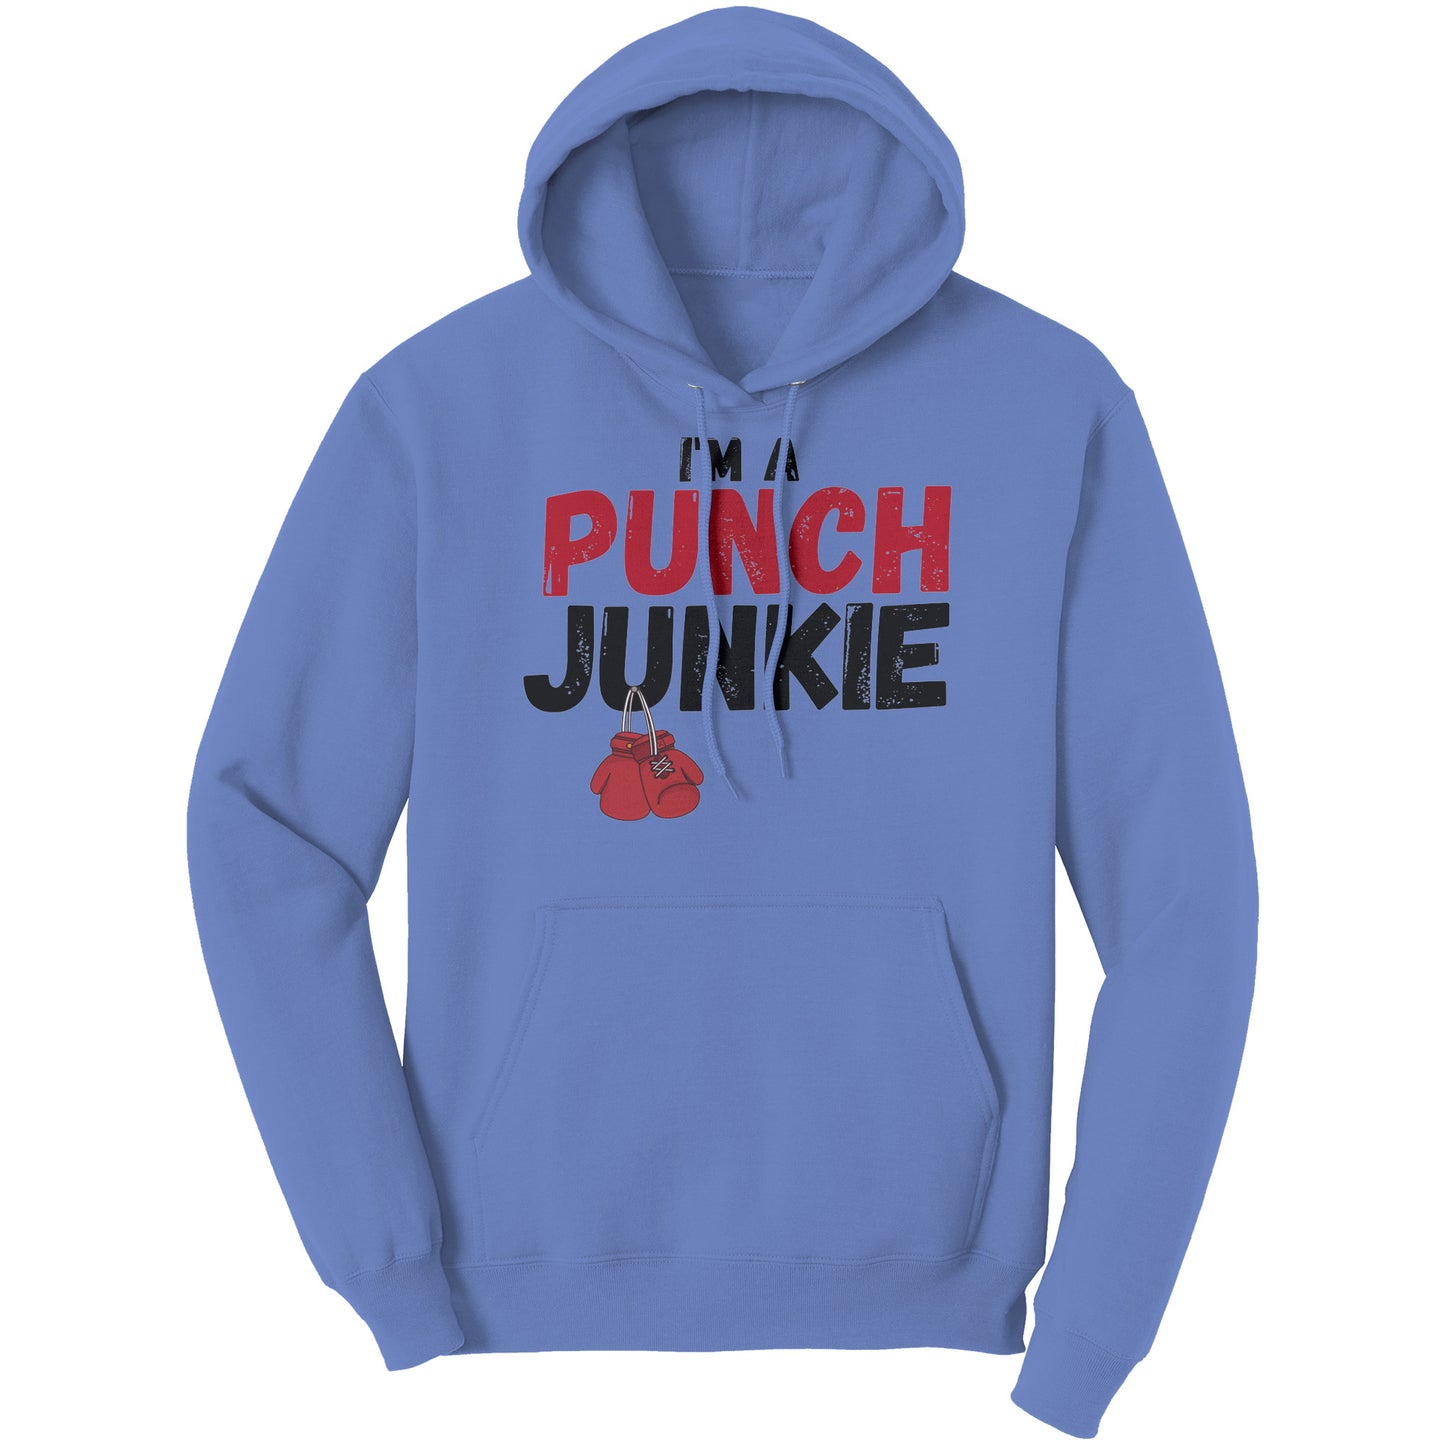 The "I'm A Punch Junkie" Hoodie